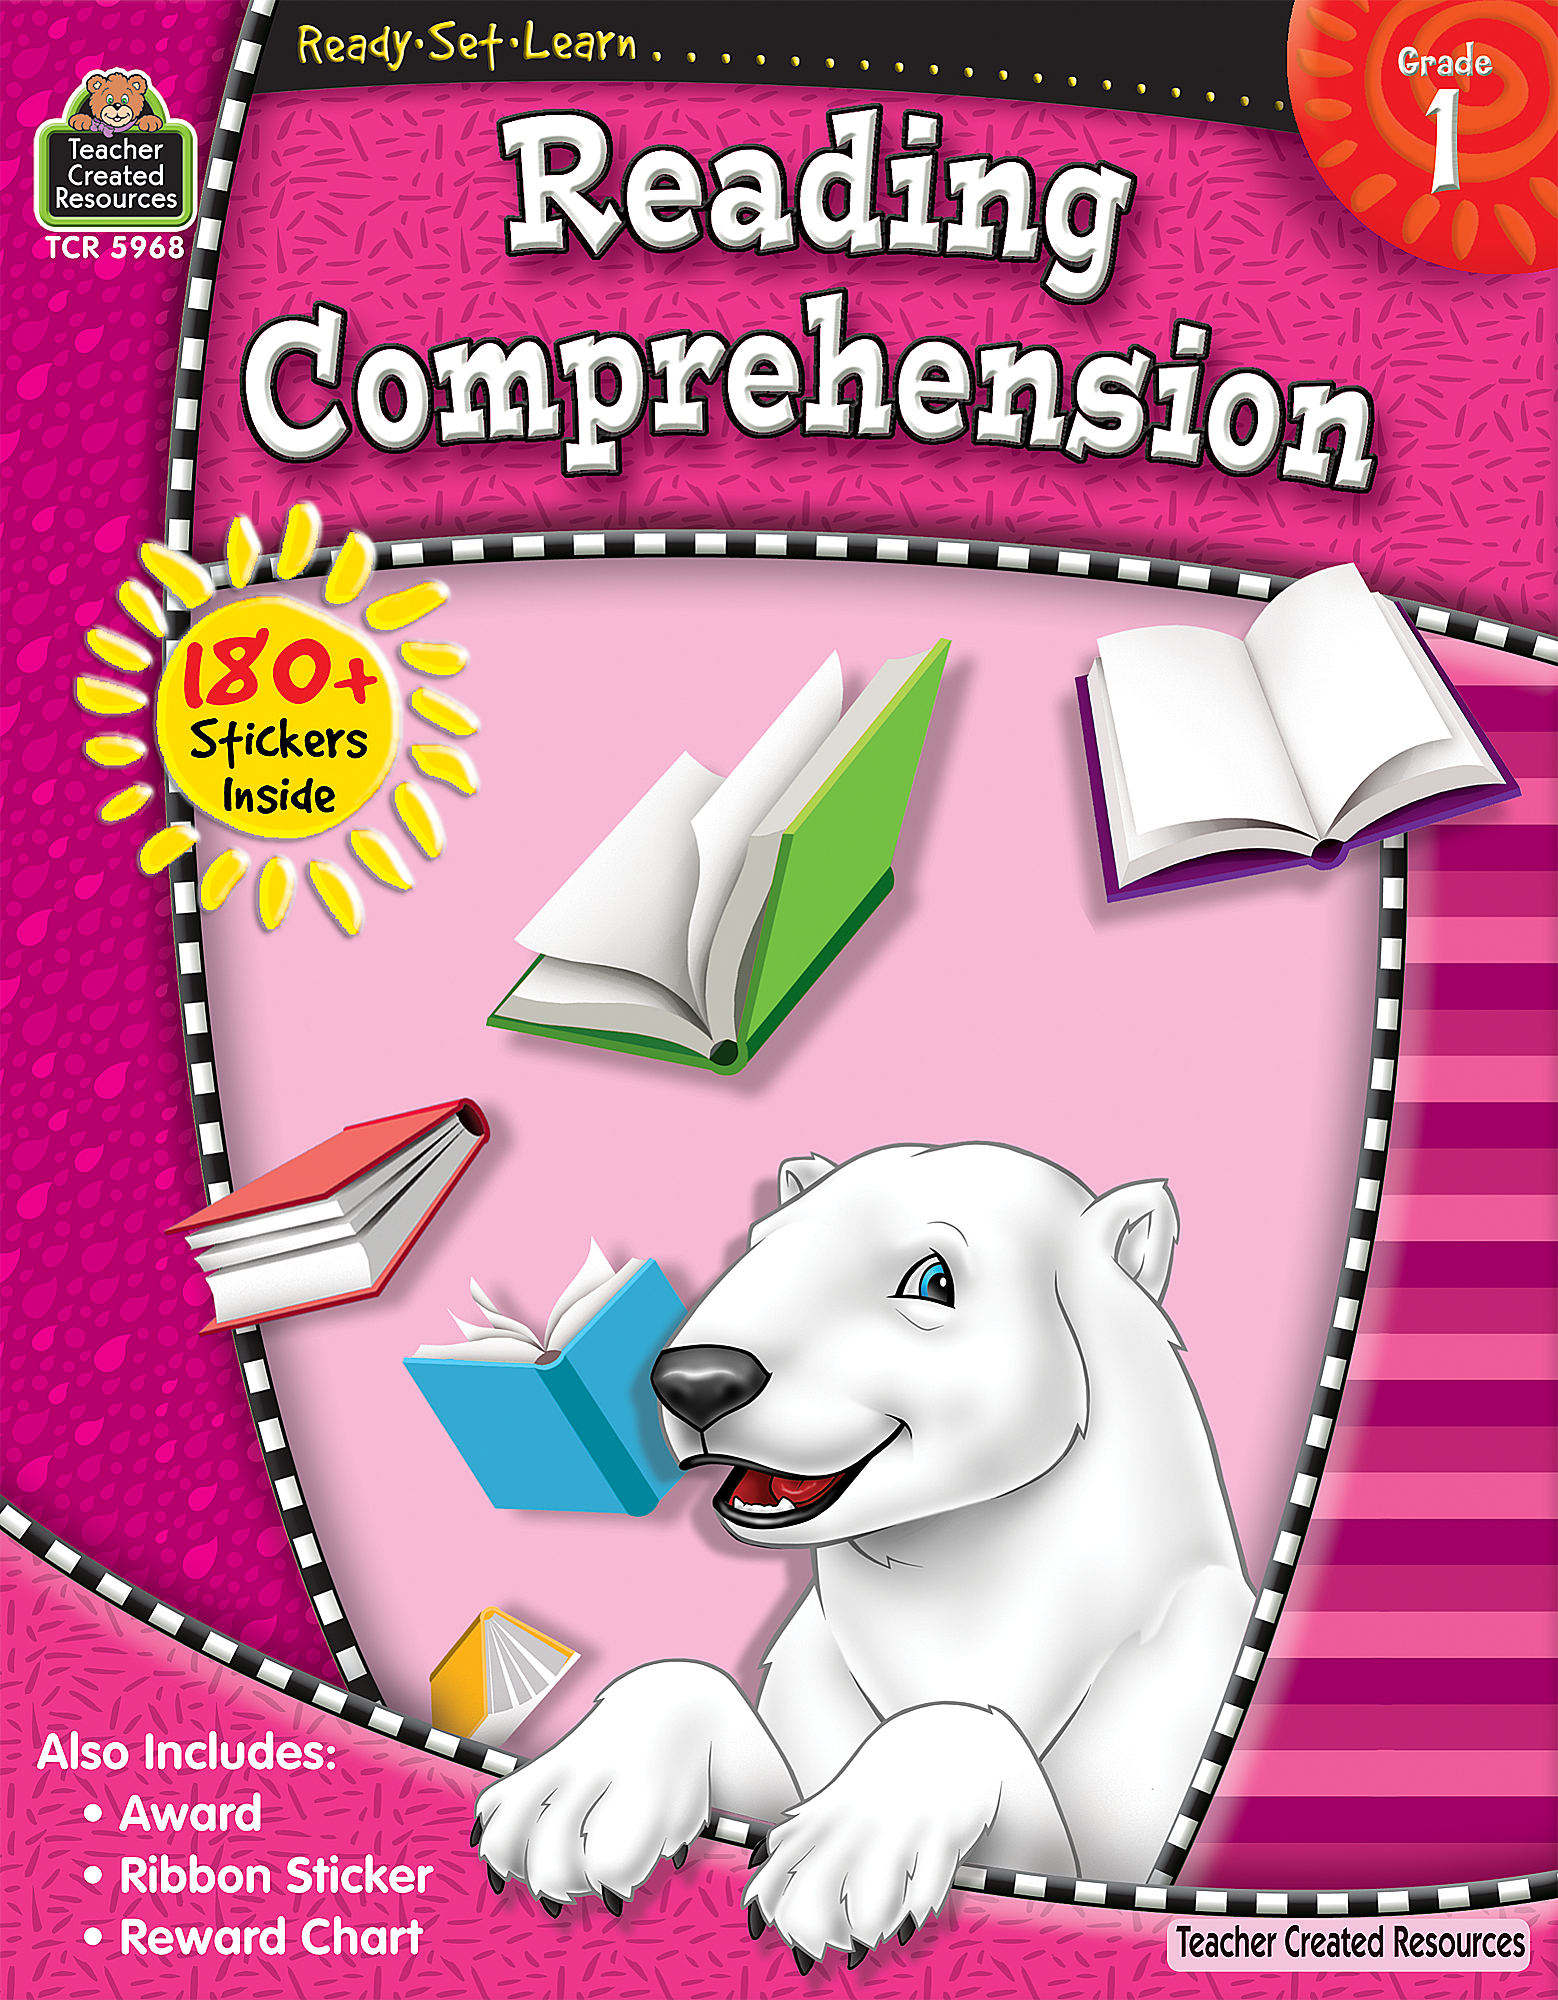 Ready-Set-Learn: Reading Comprehension, Grade 1 - TCR5968 ...